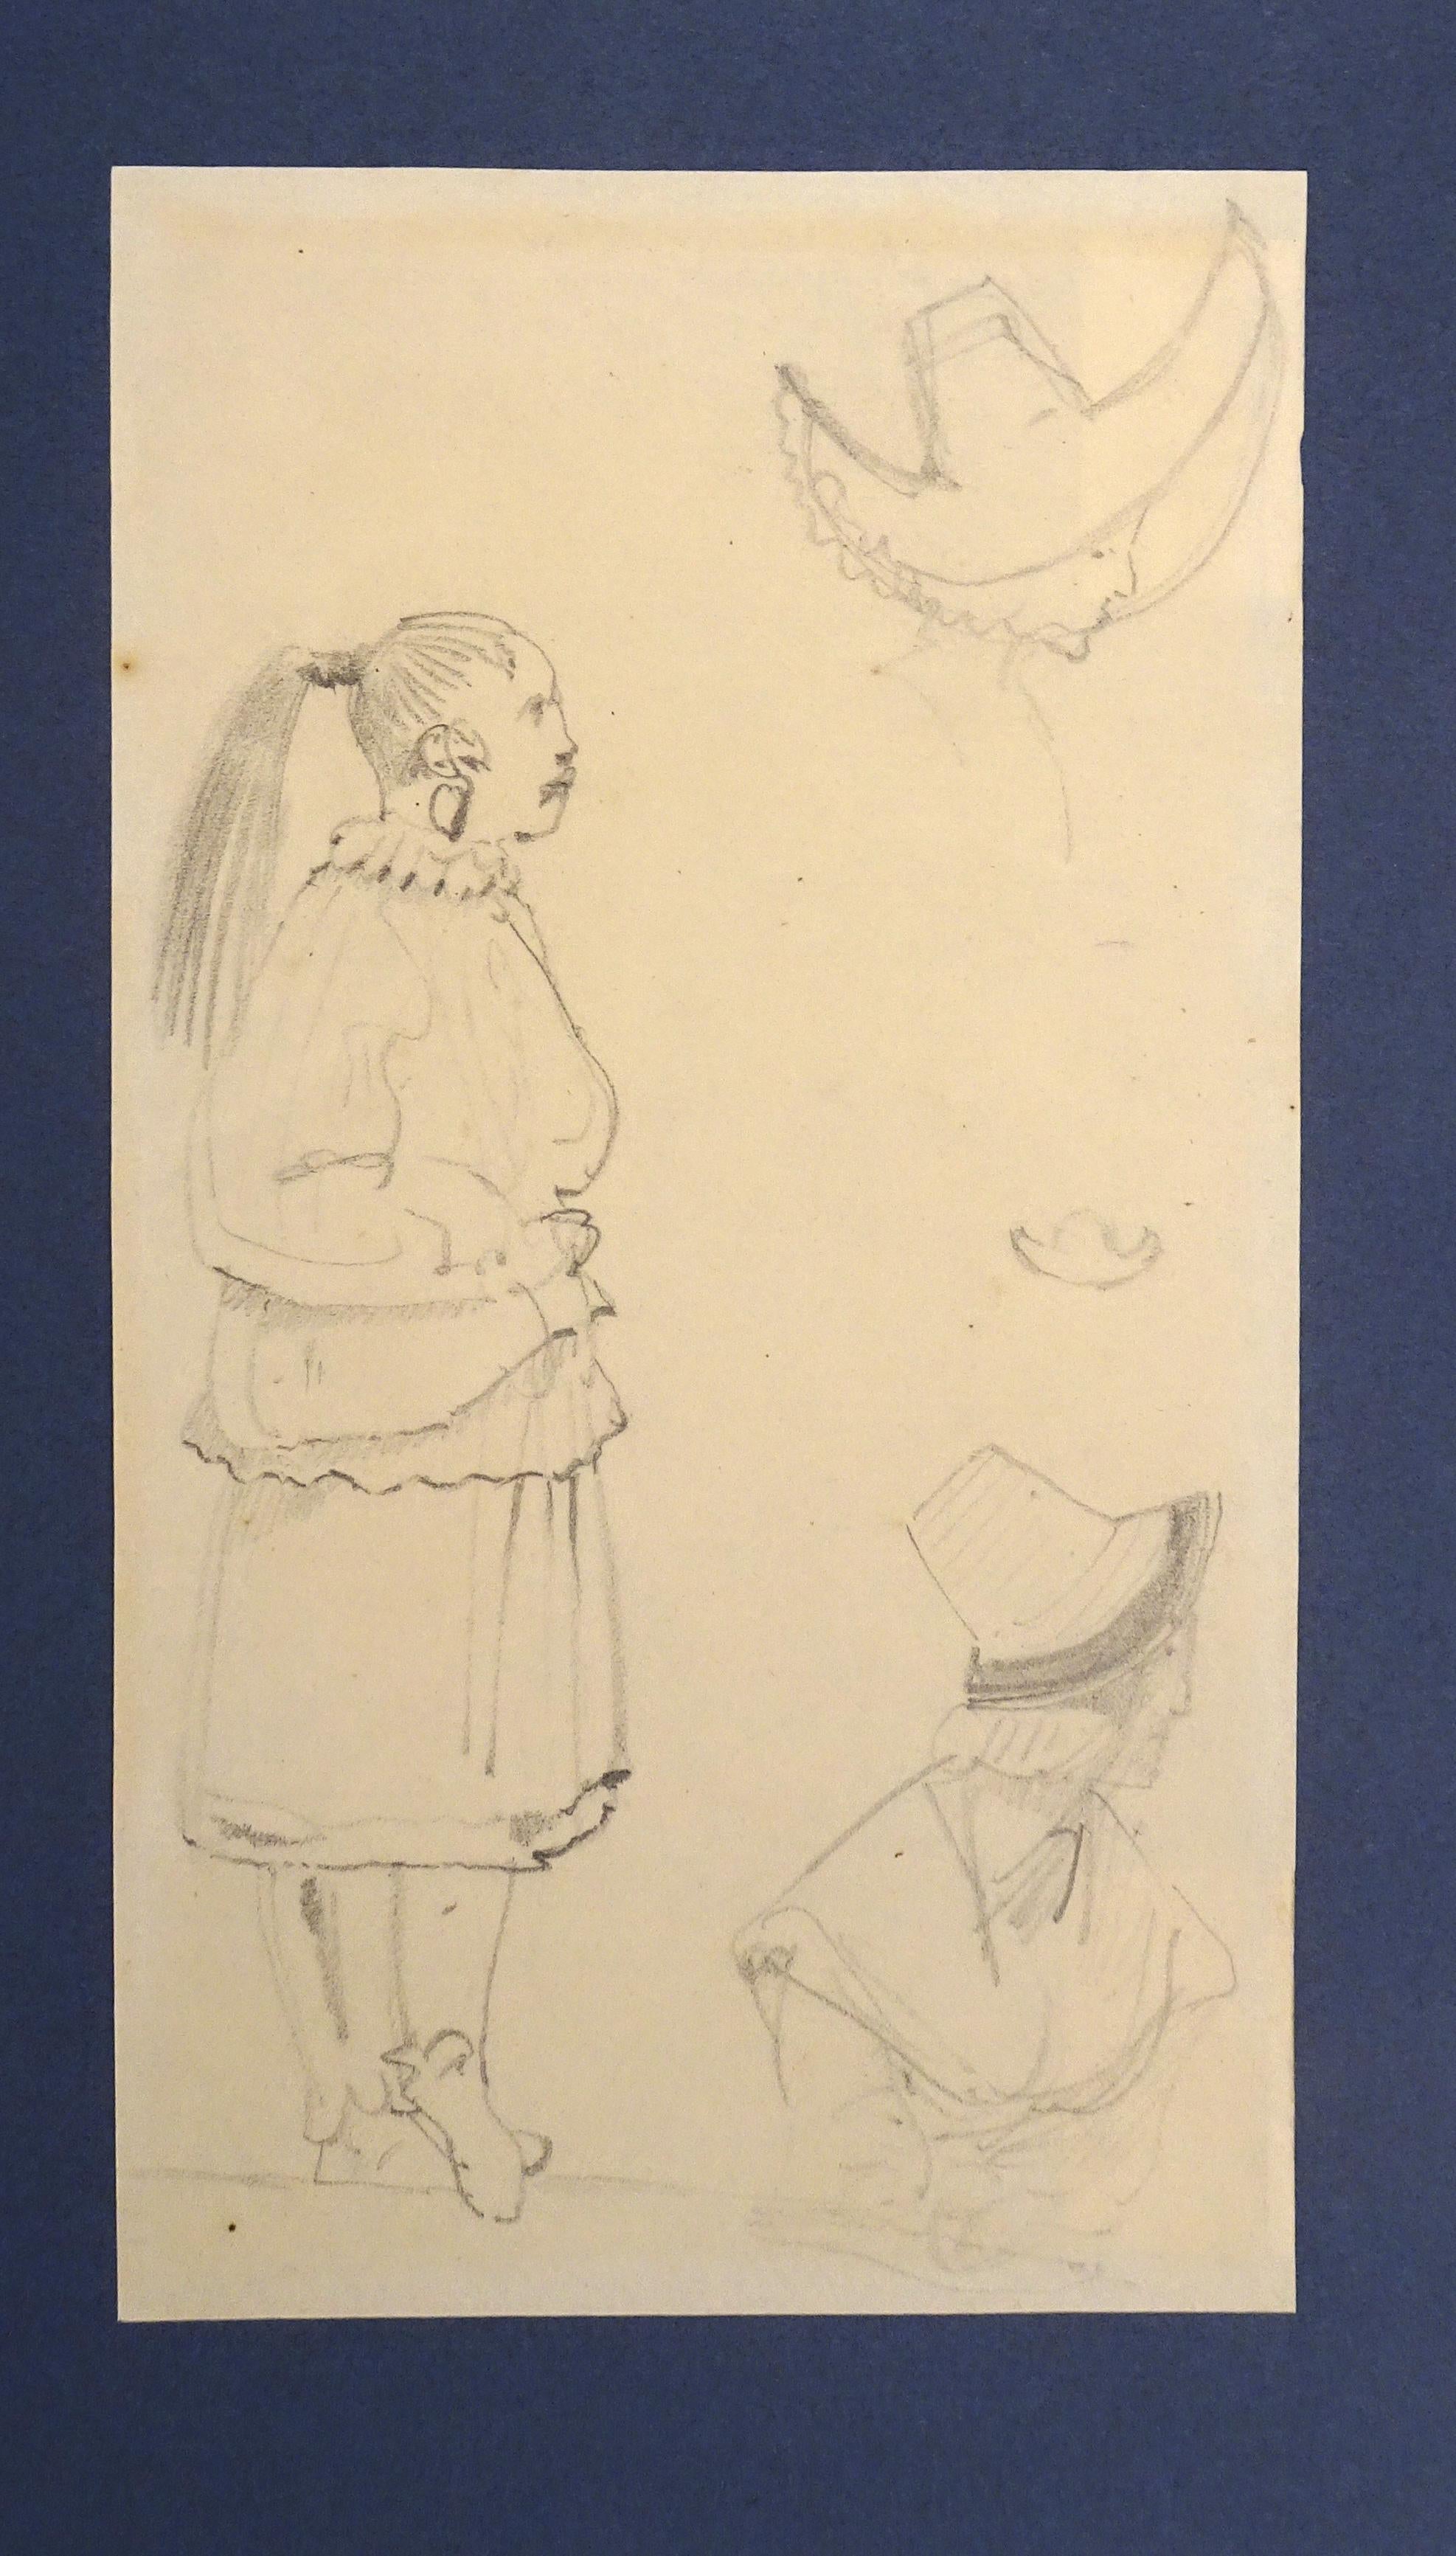 Caricatures - Original Pencil Drawing by Horace Vernet - Mid 1800